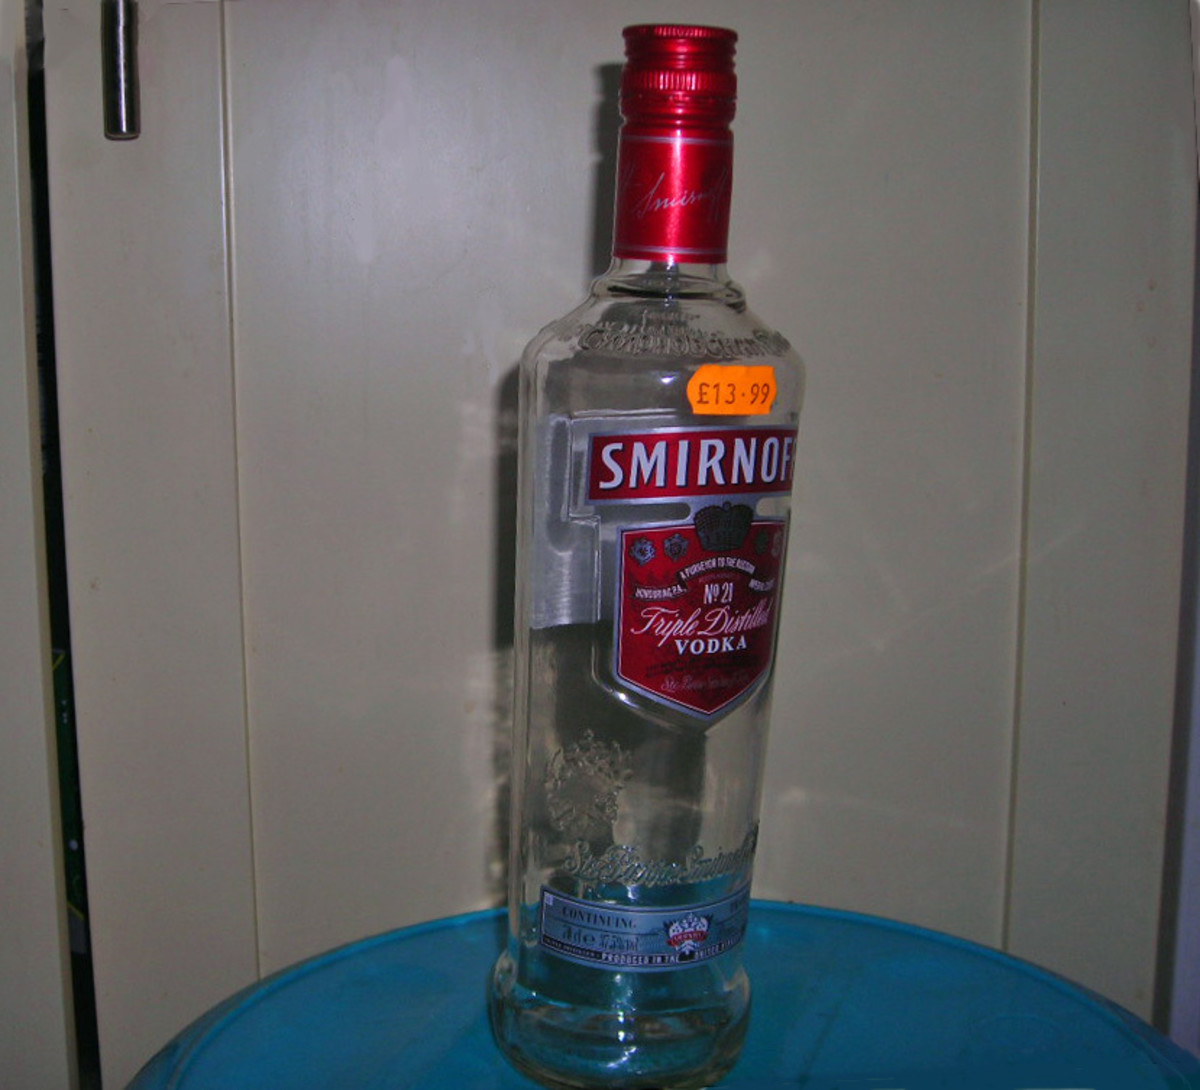 Smirnov vodka imported from Russia